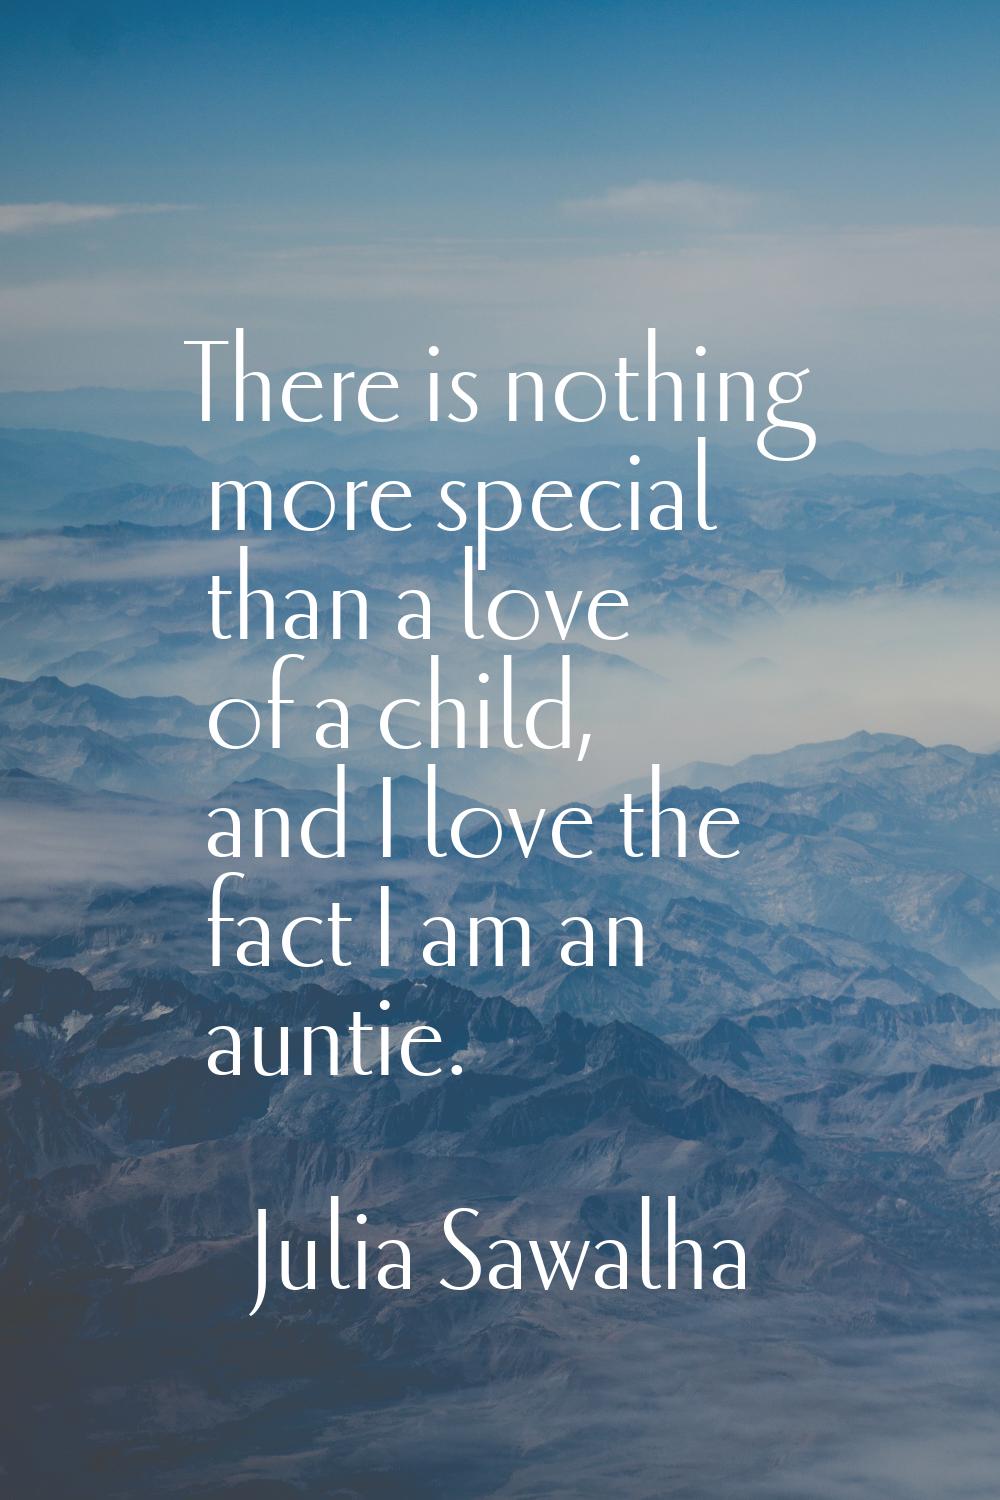 There is nothing more special than a love of a child, and I love the fact I am an auntie.